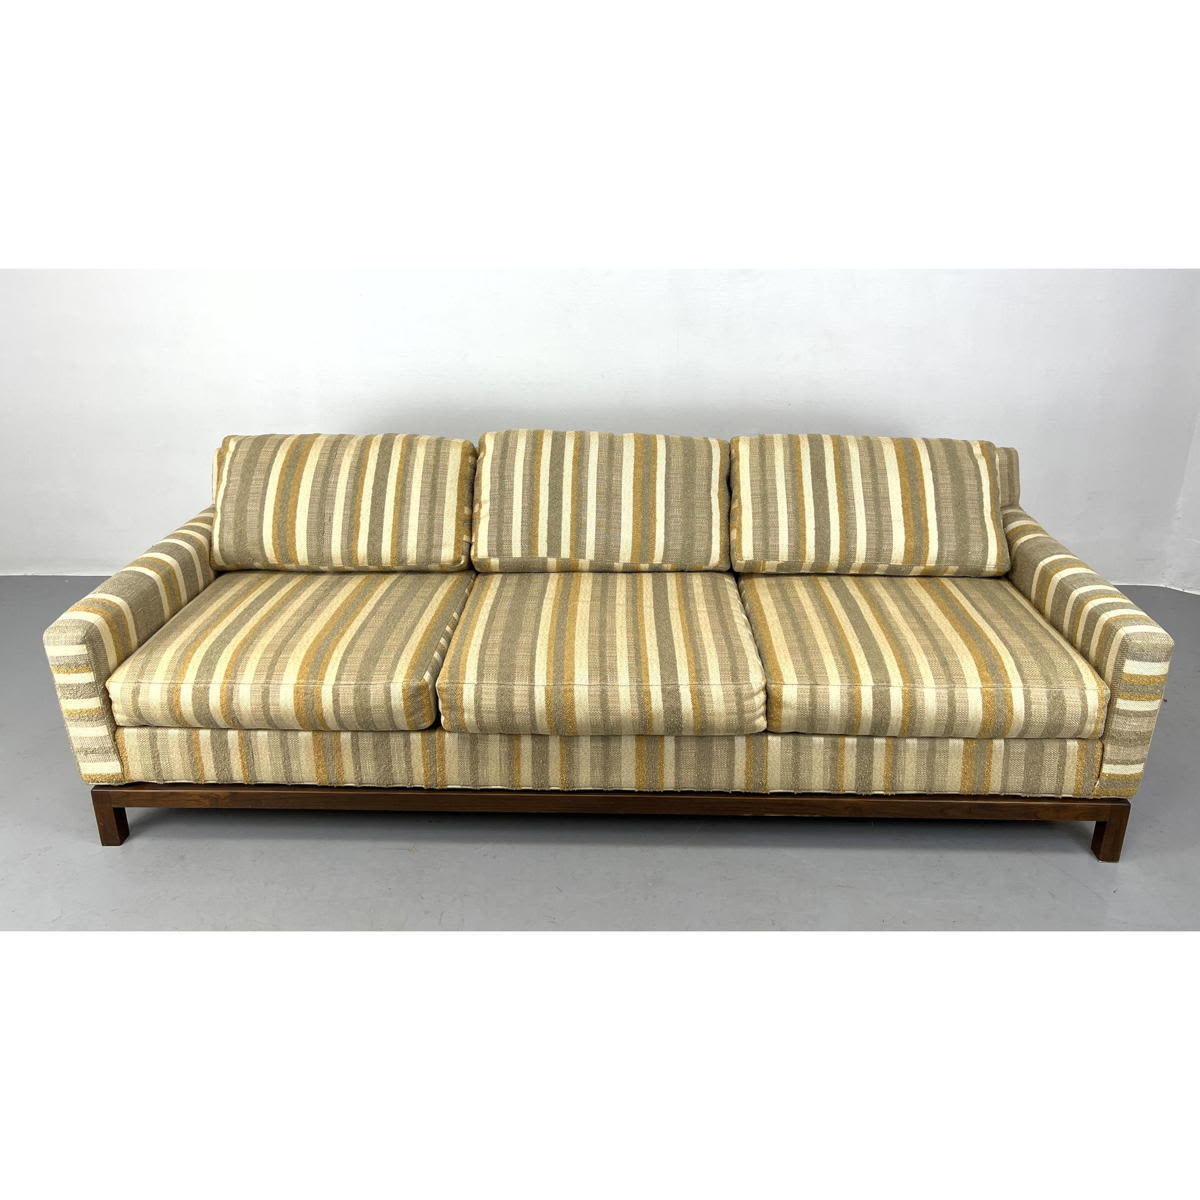 Selig Mid Century Modern Sofa Couch  2ff147